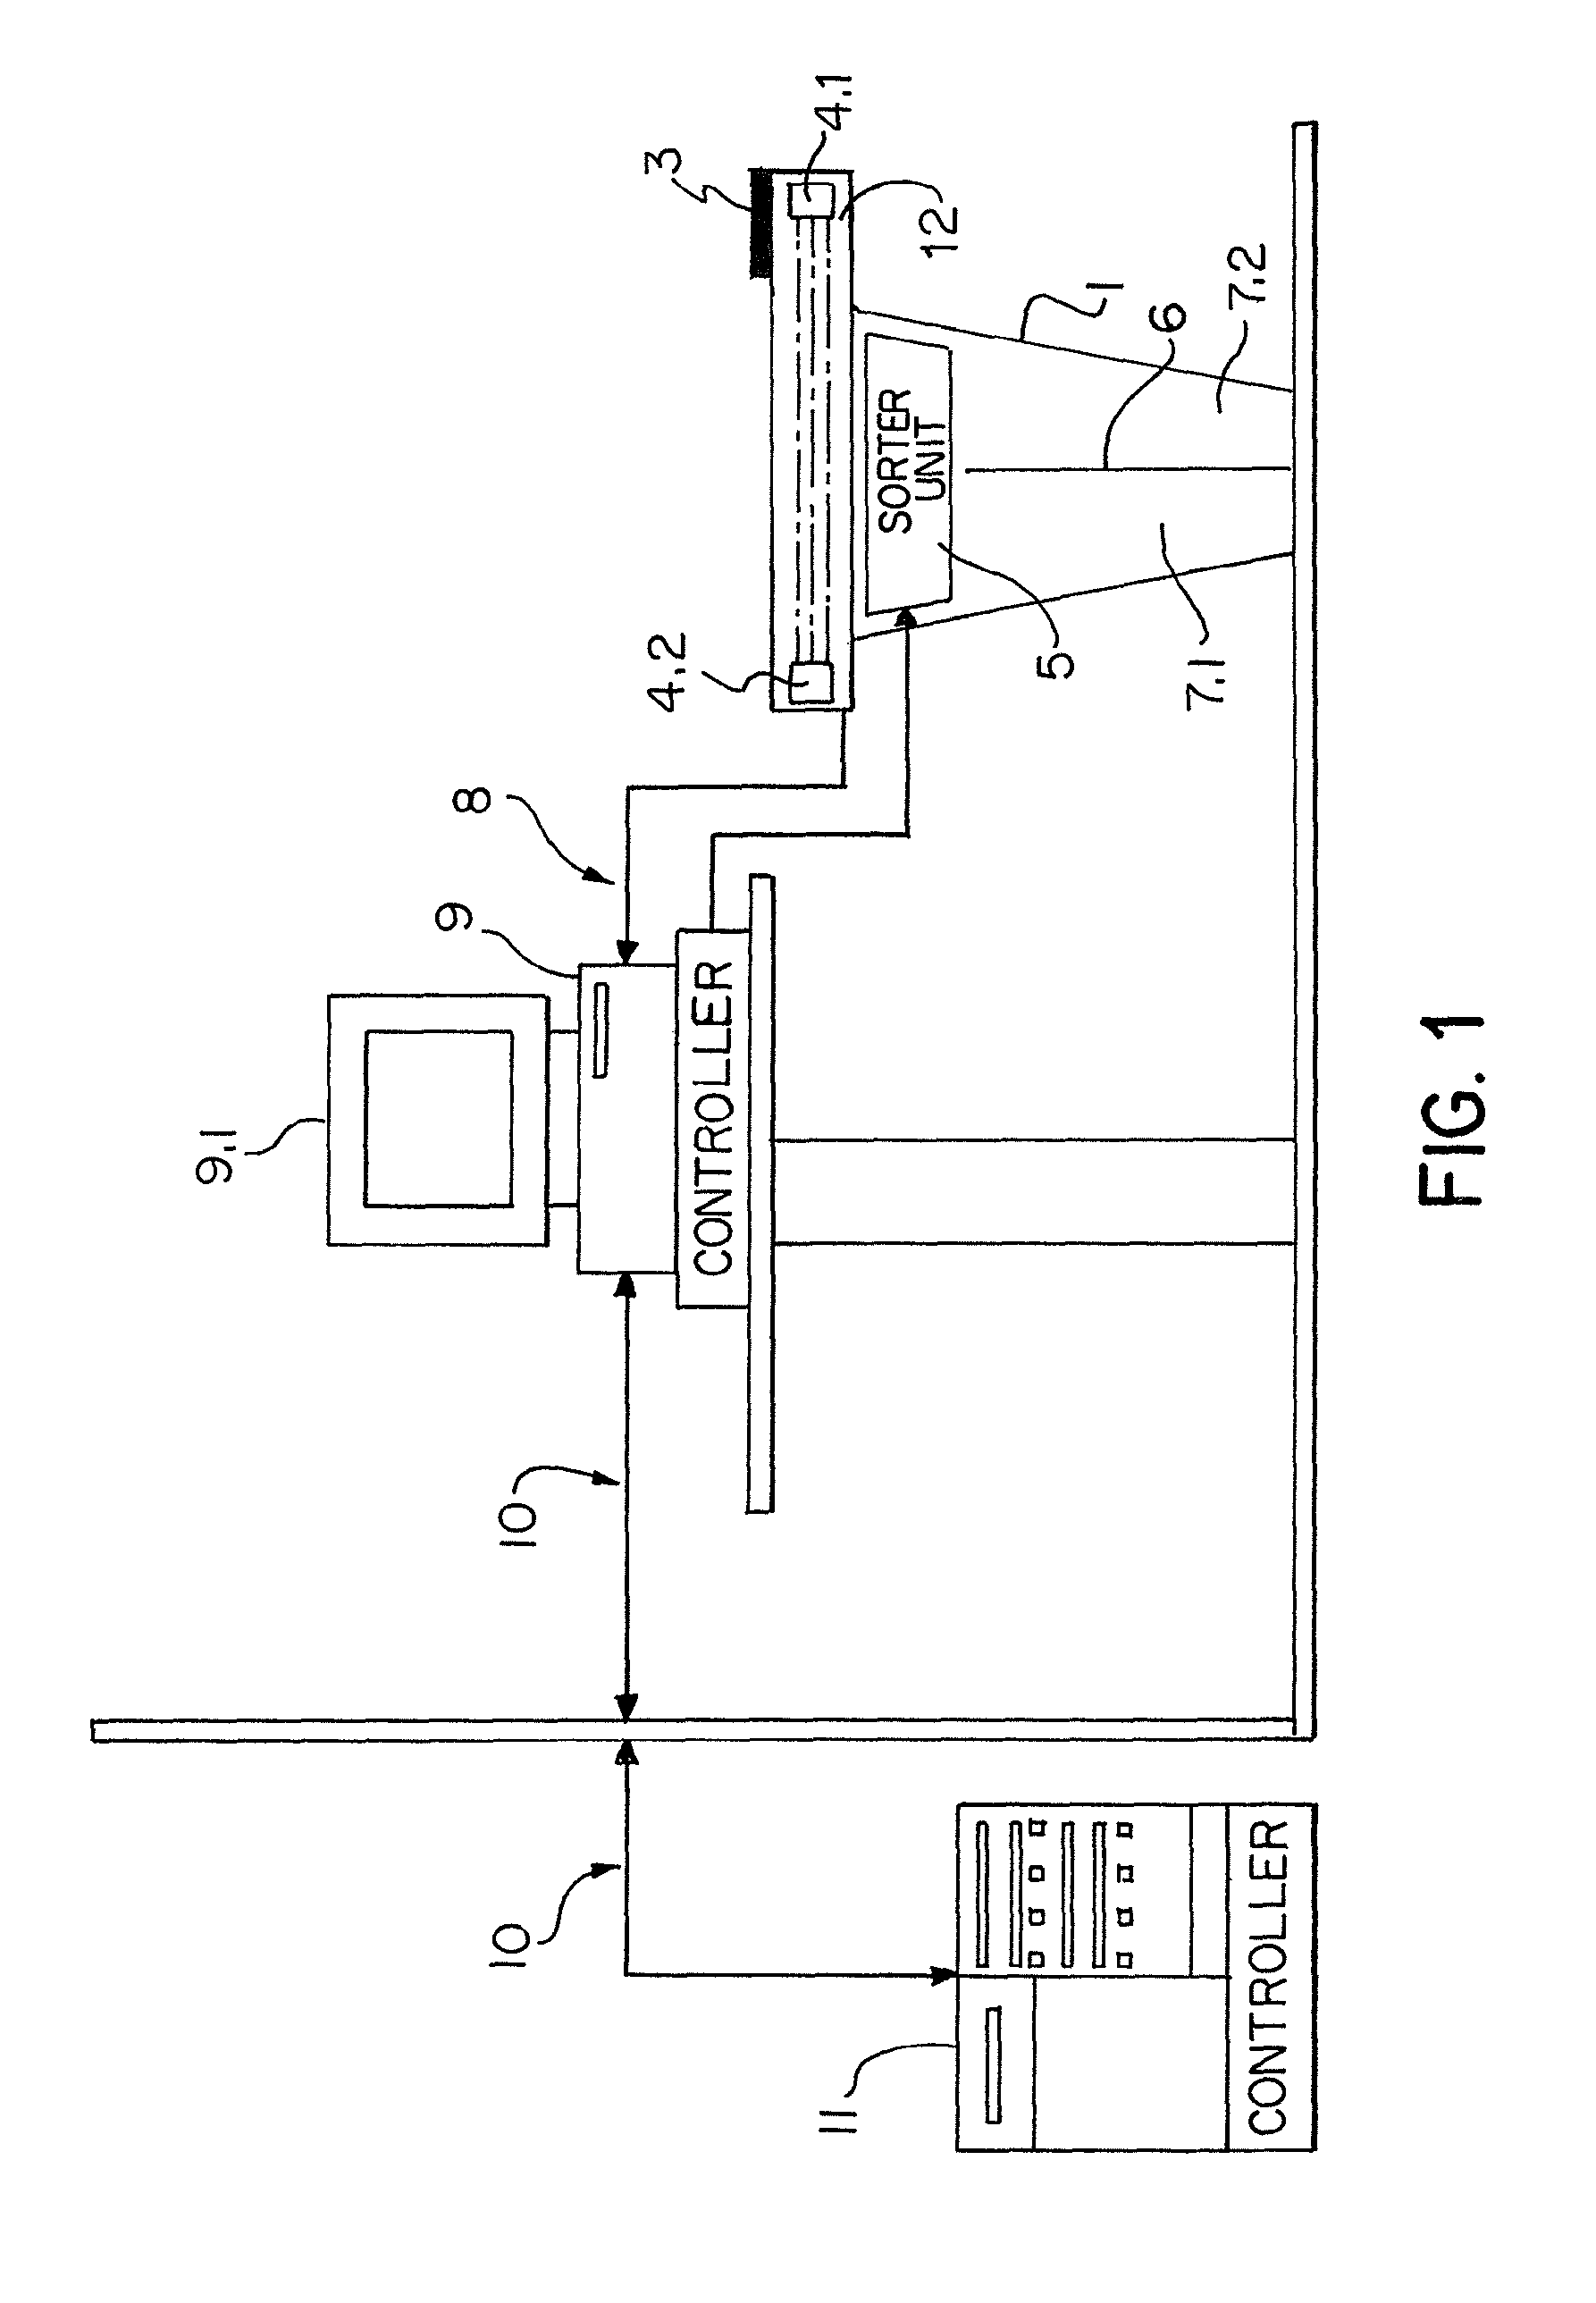 Device for receiving of disposable items for an operating room